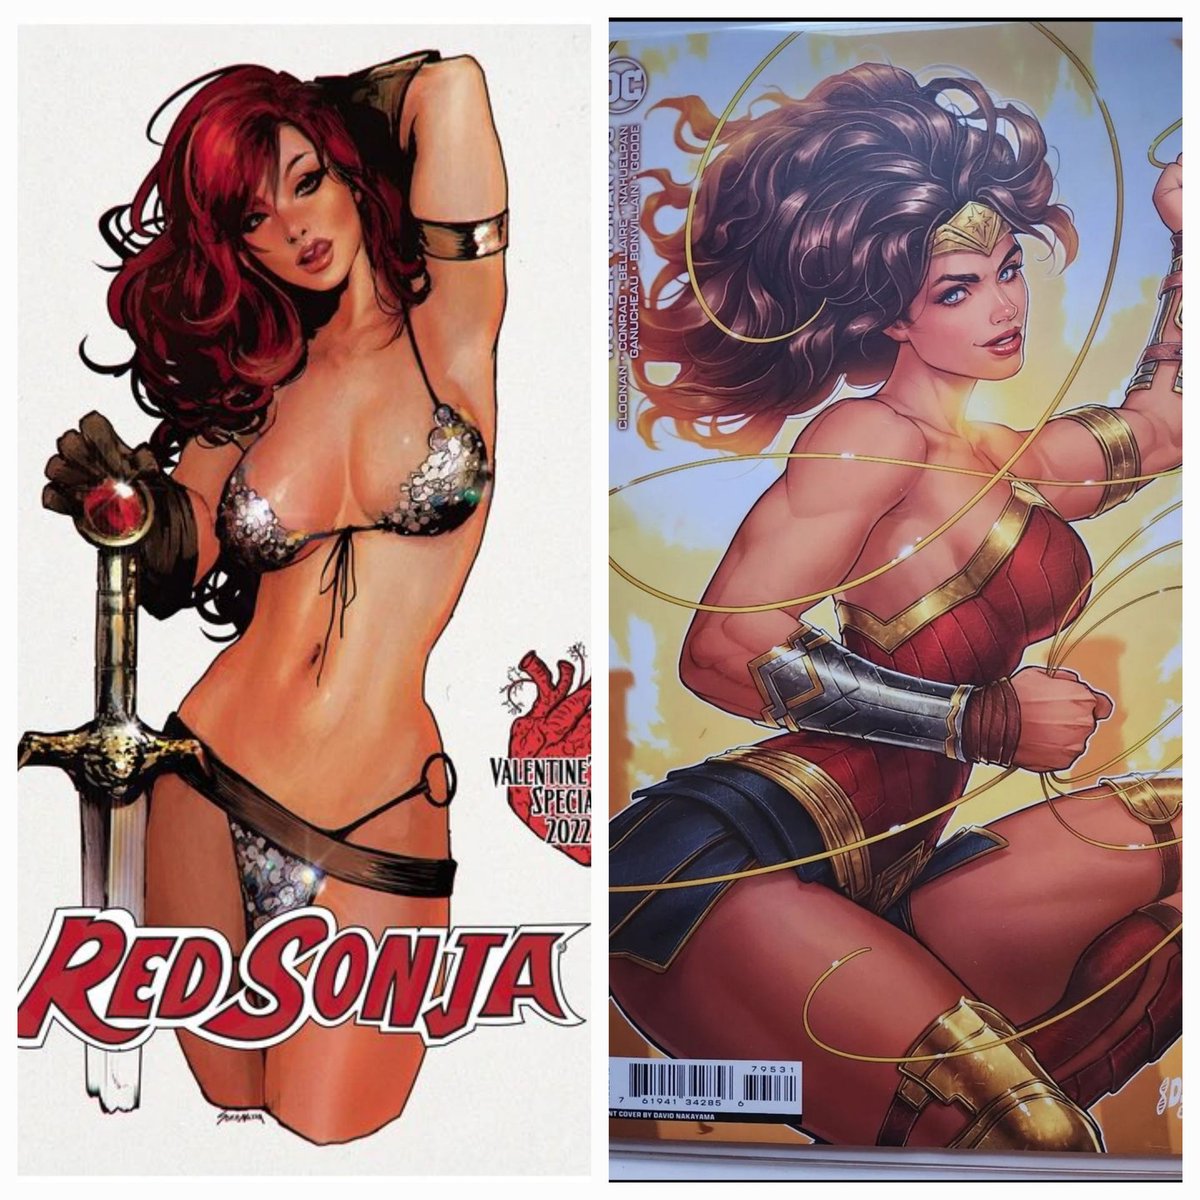 Who wins this fight? Red Sonja or Wonder Woman? Vote for your choice in the comments section. #RedSonja #DynamiteComics #WonderWoman #DCComics